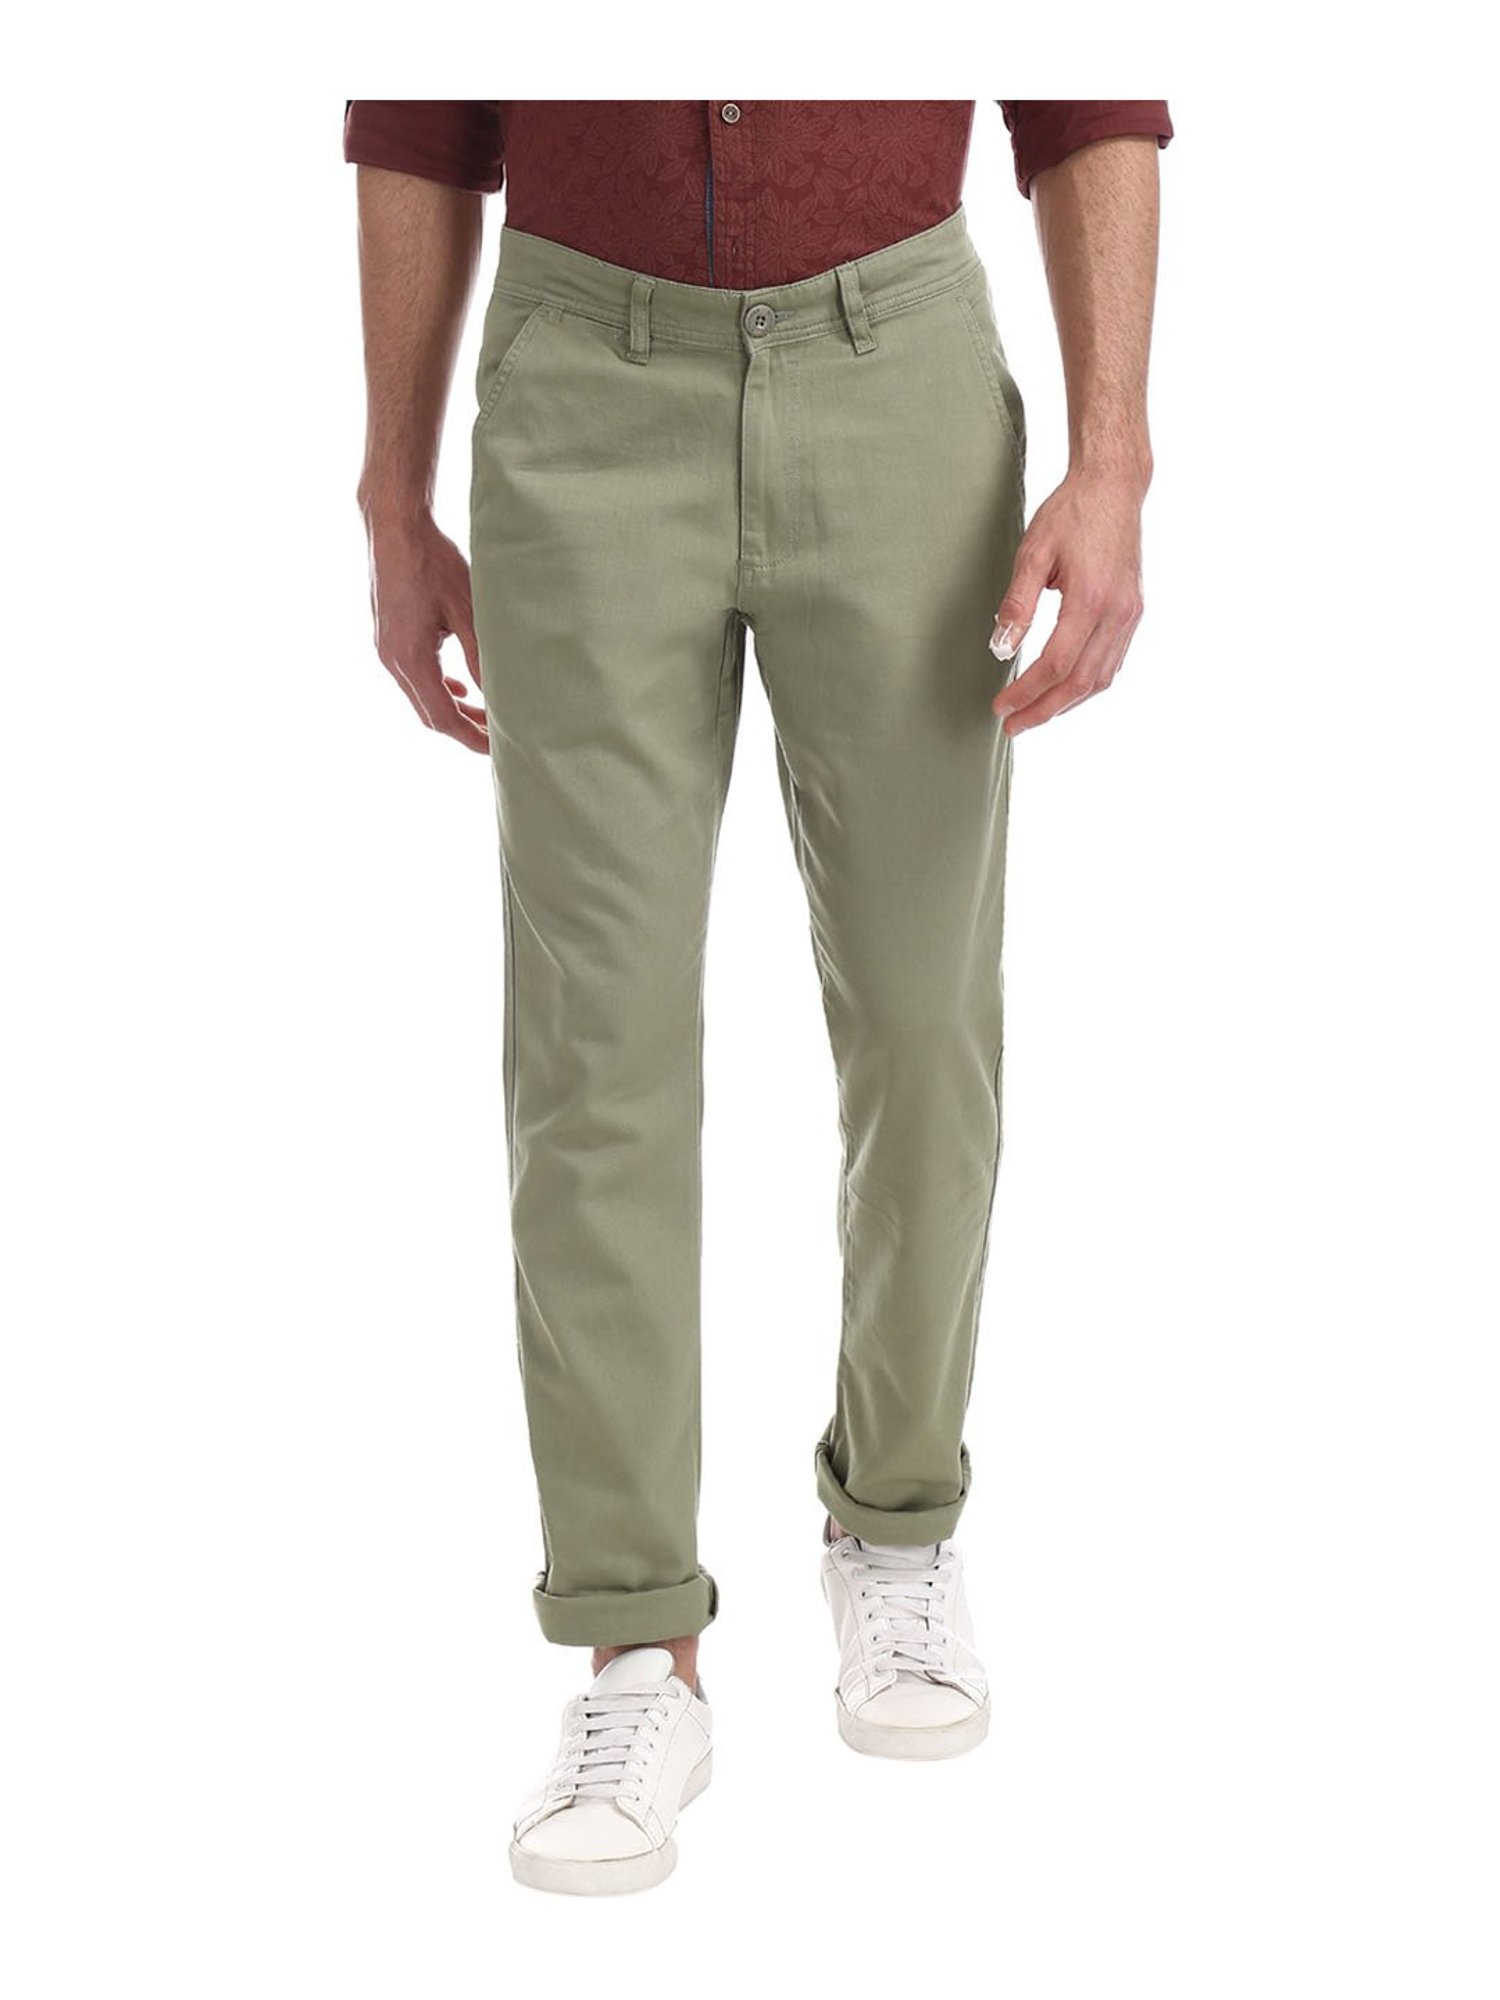 Casual Knit Cuffed Pants With Side Pocket, 43% OFF